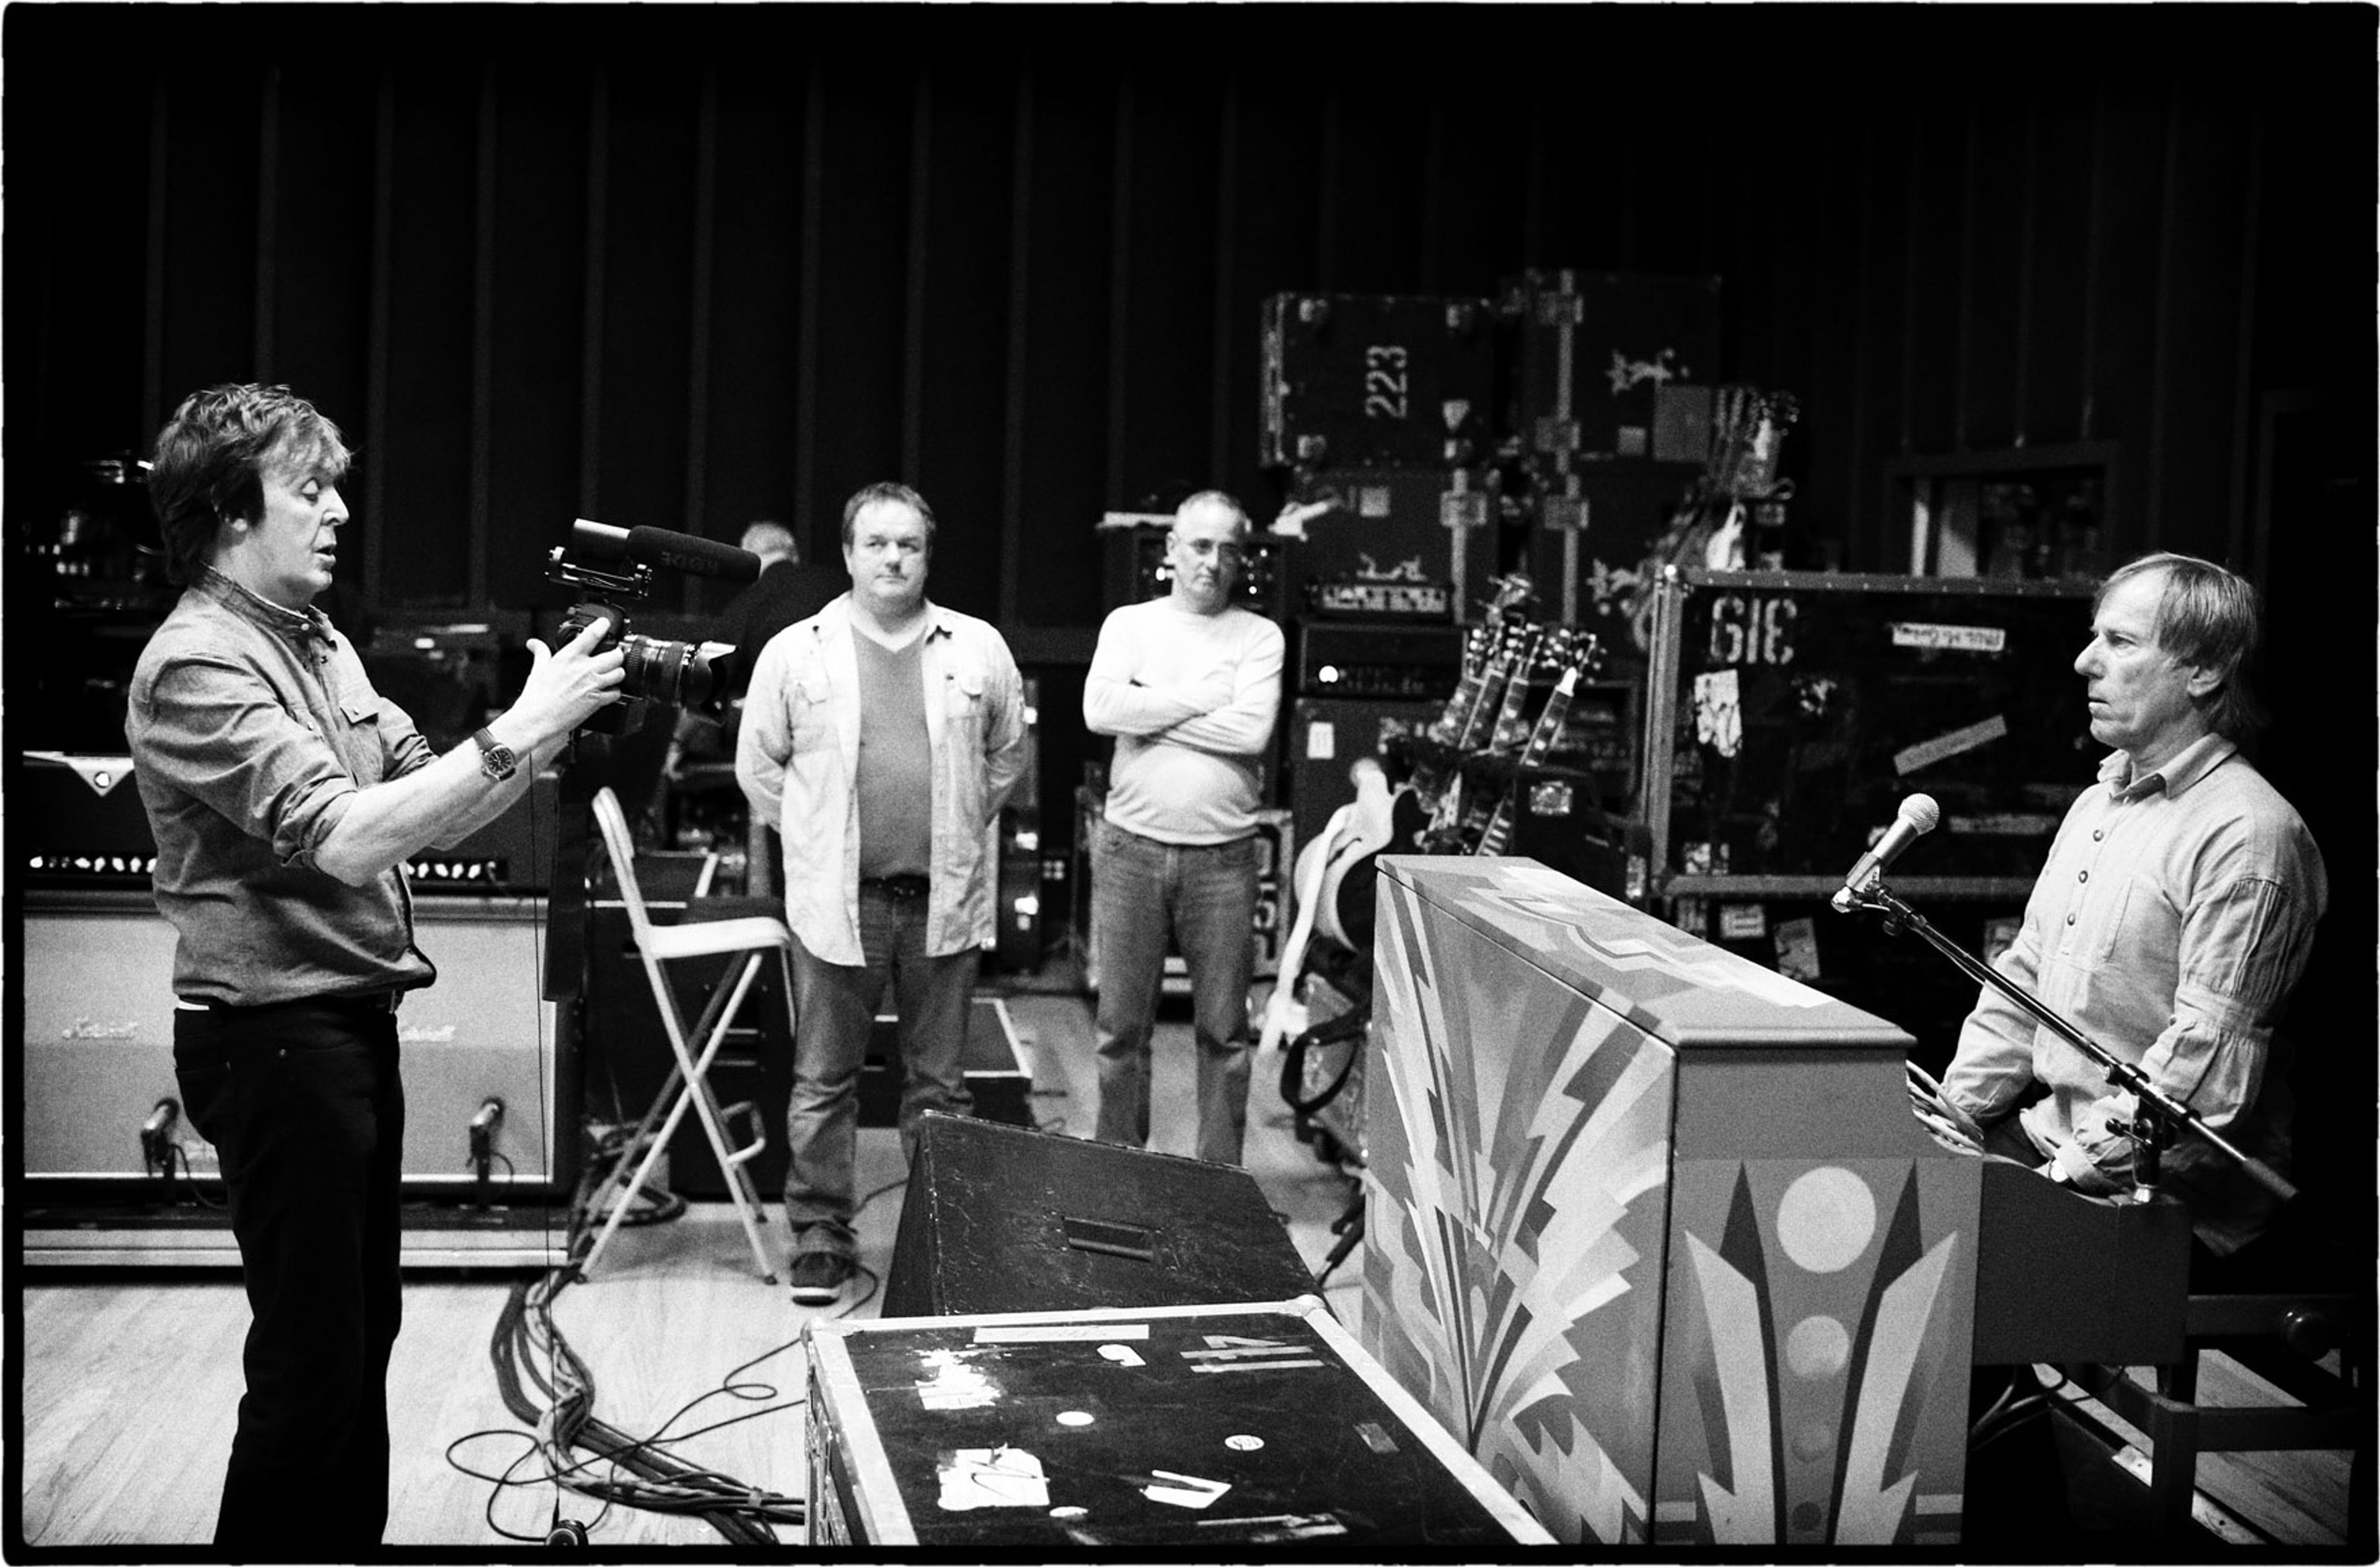 Paul at rehearsals, Los Angeles, April 13th 2013